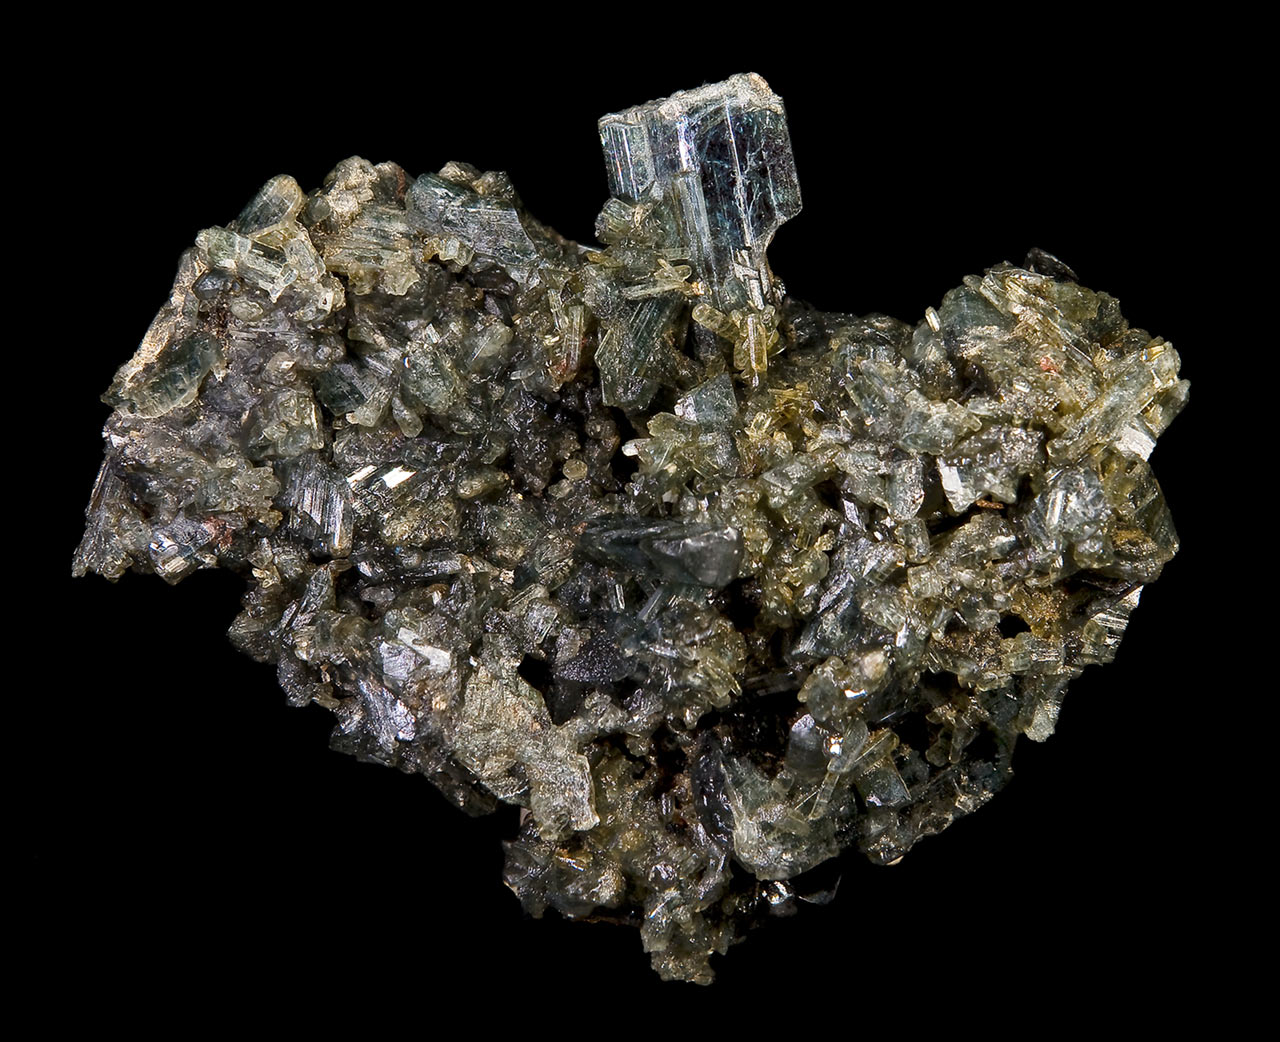 Green tremolite crystals from Wilberforce, Canada